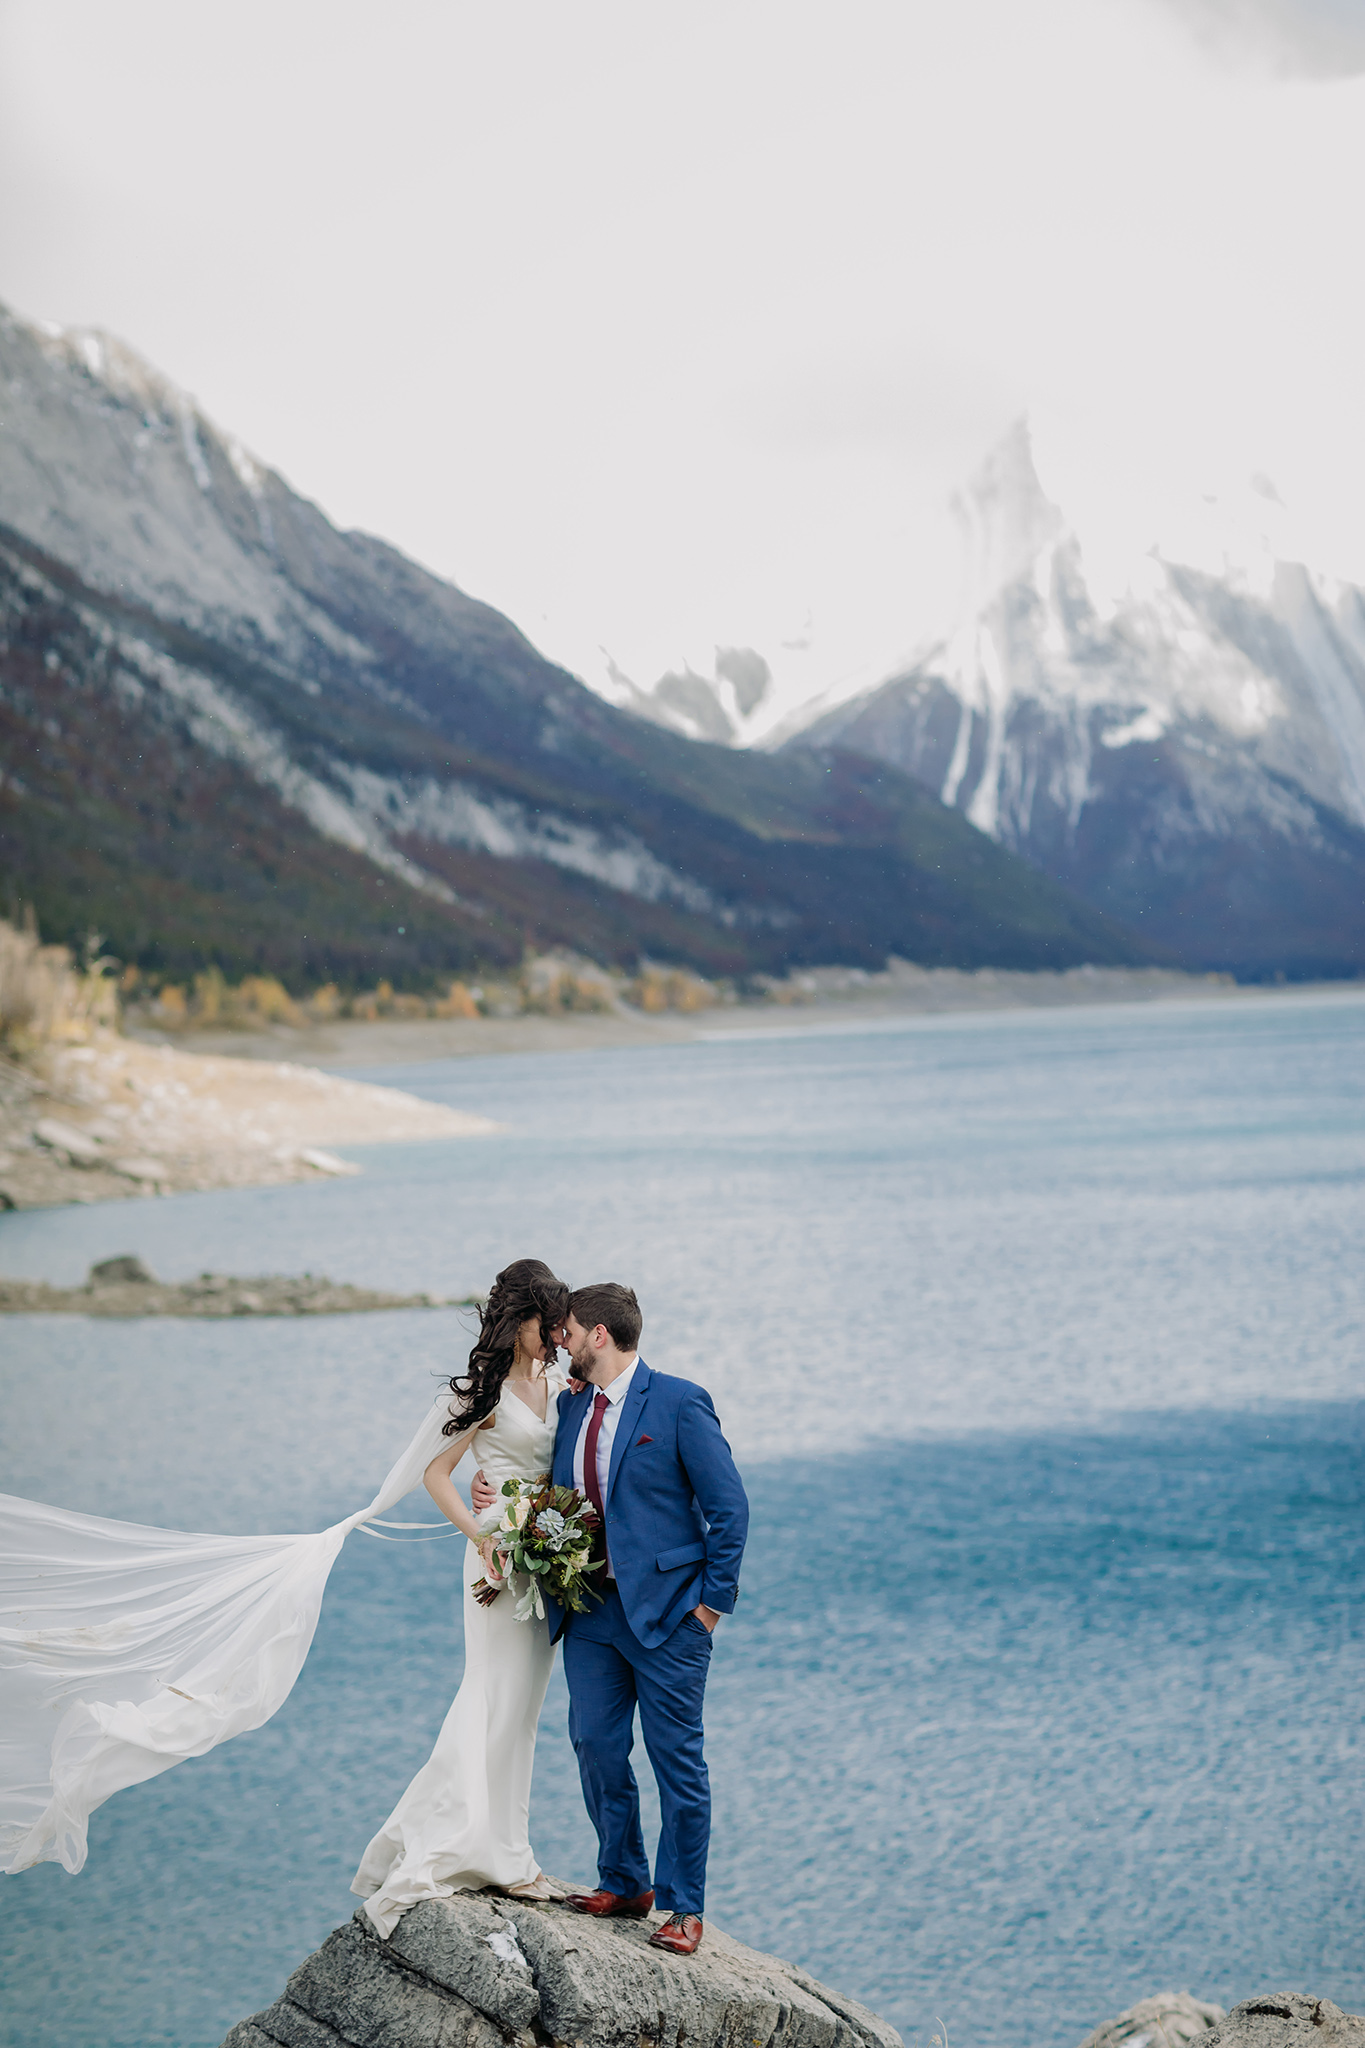 A Guide to Eloping in the Canadian Rockies | Mountain Wedding photographed by ENV Photography | windy autumn wedding at Medicine Lake in Jasper National Park. Bride wearing cape in the wind.